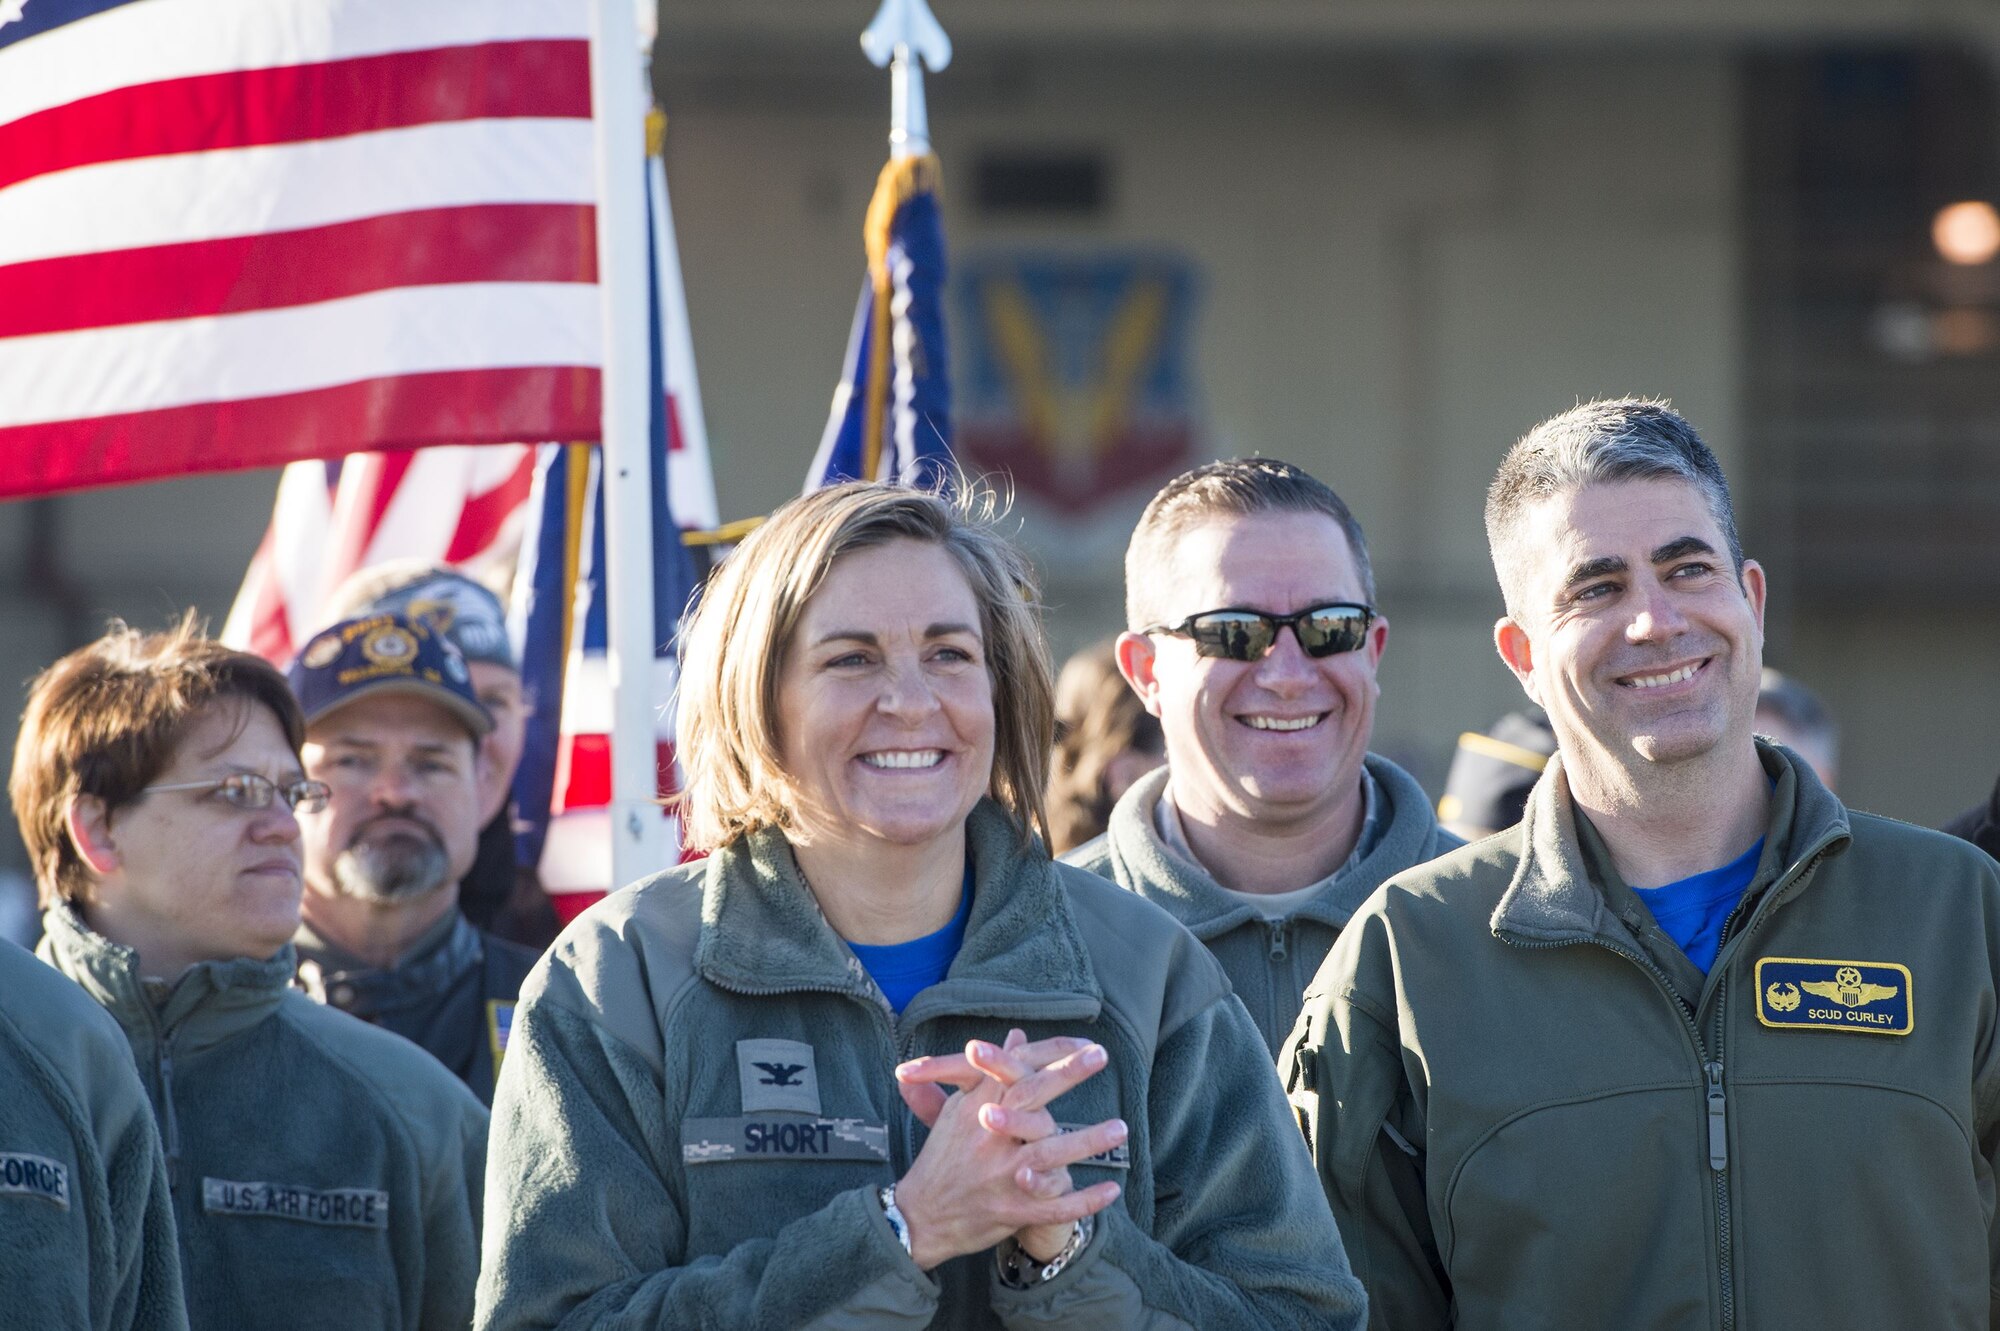 Moody leadership awaits the arrival of the 74th Expeditionary Fighter Squadron during a redeployment ceremony, Jan. 19, 2018, at Moody Air Force Base, Ga. Over 300 Airmen from Moody deployed for seven months in support of Operation Inherent Resolve to defeat ISIS in designated areas in Iraq and Syria.